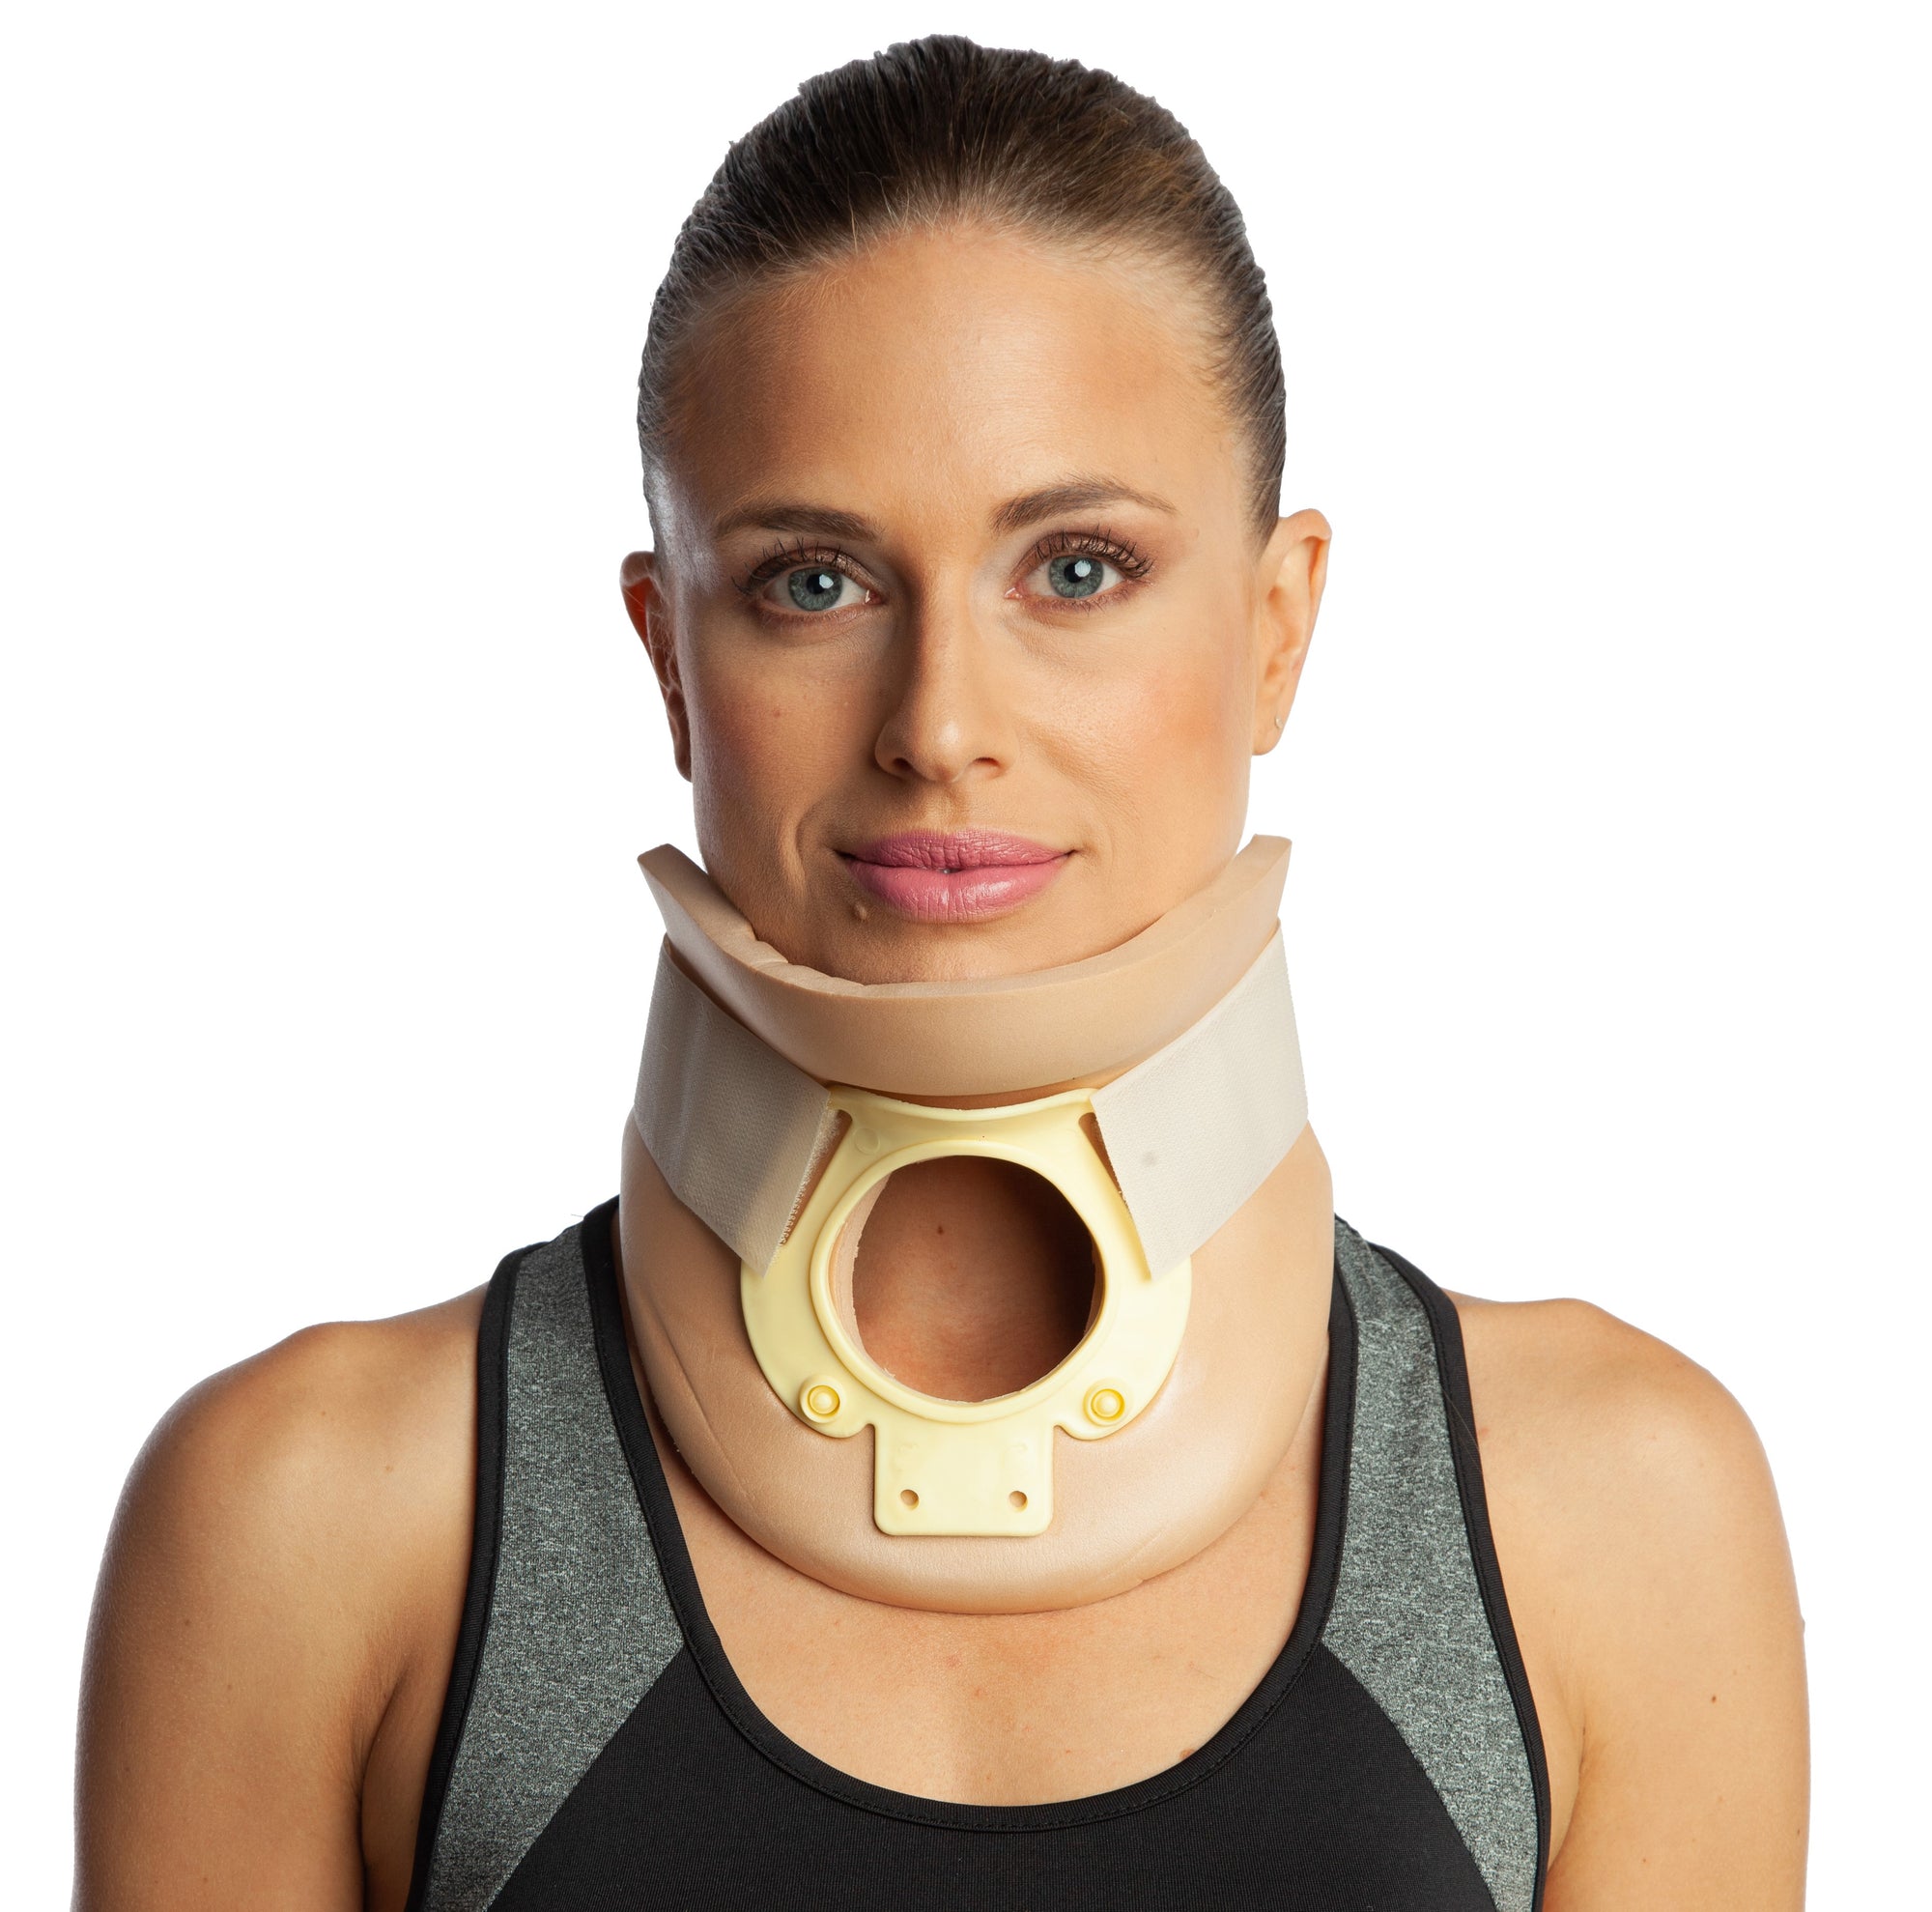 ArmoLine Open Tracheotomy Philadelphia Neck Collar Picture. The item is worn by the model and picture is taken by front side aspect